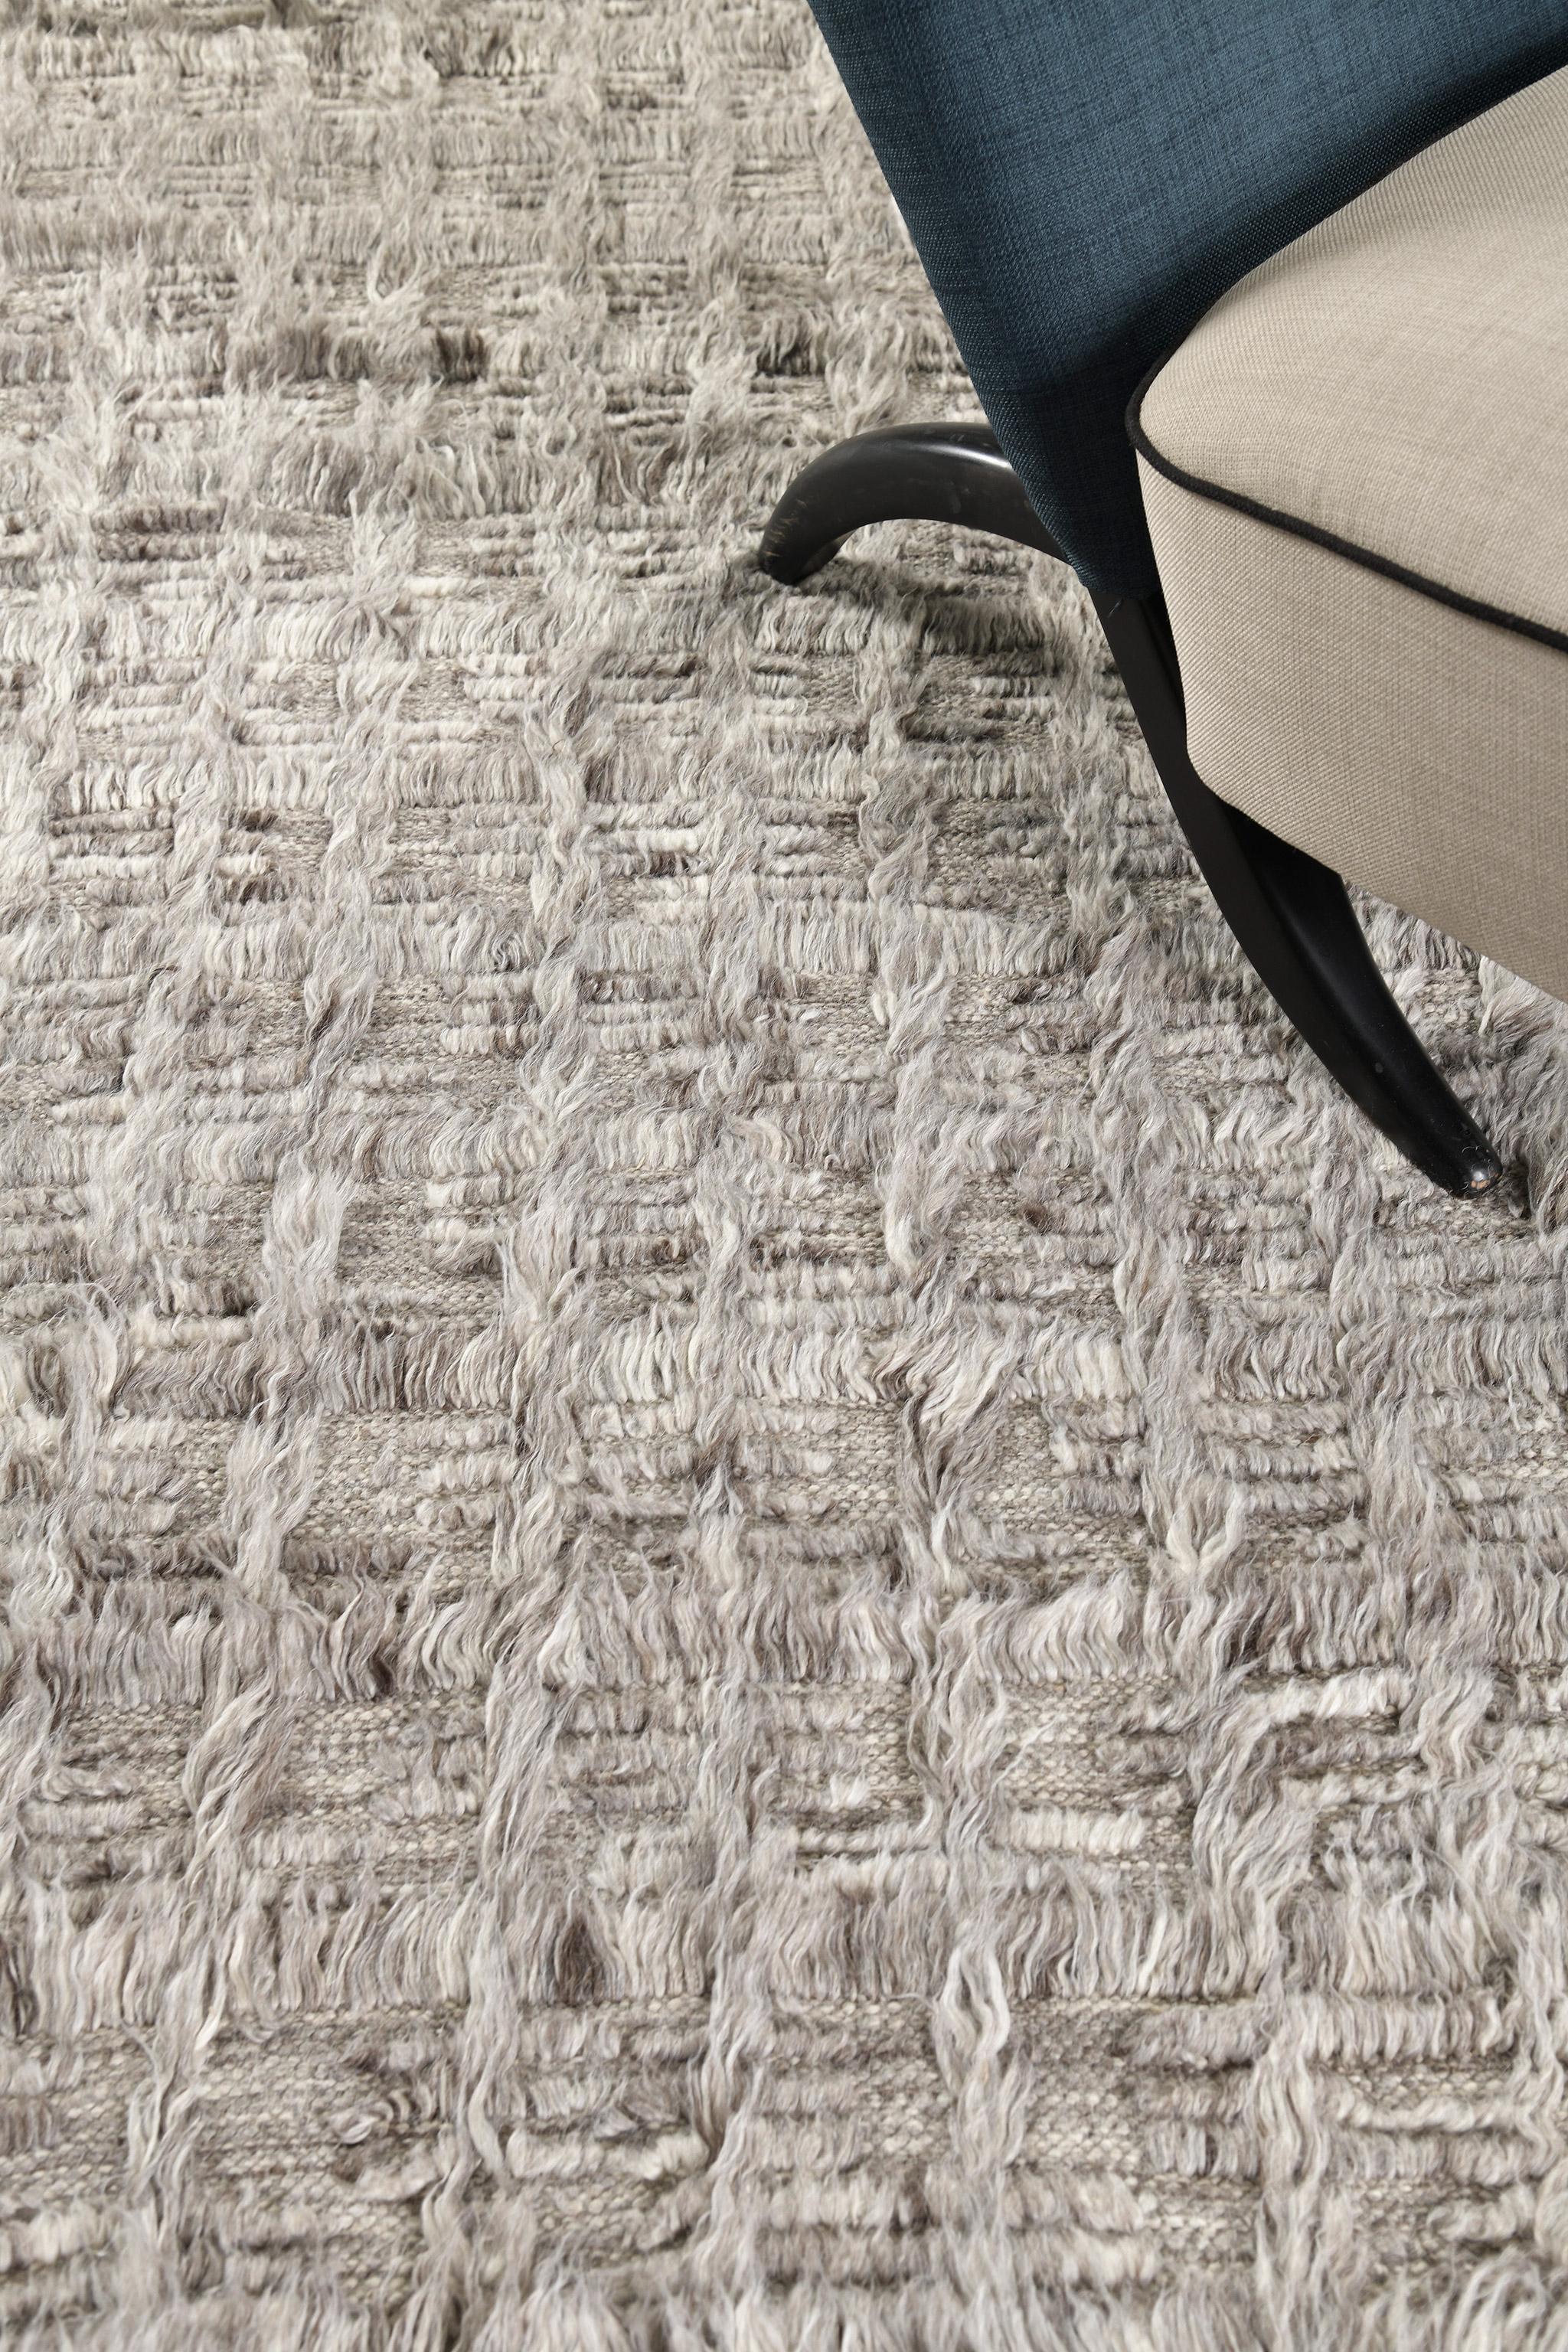 The Mani rug is a monochrome design syncopating long and short pile with open flatweave. This piece is made in tones of cool heathered gray.

An extension of Mehraban’s popular Amihan design, the Sahara Collection delves further with grid-riffs of